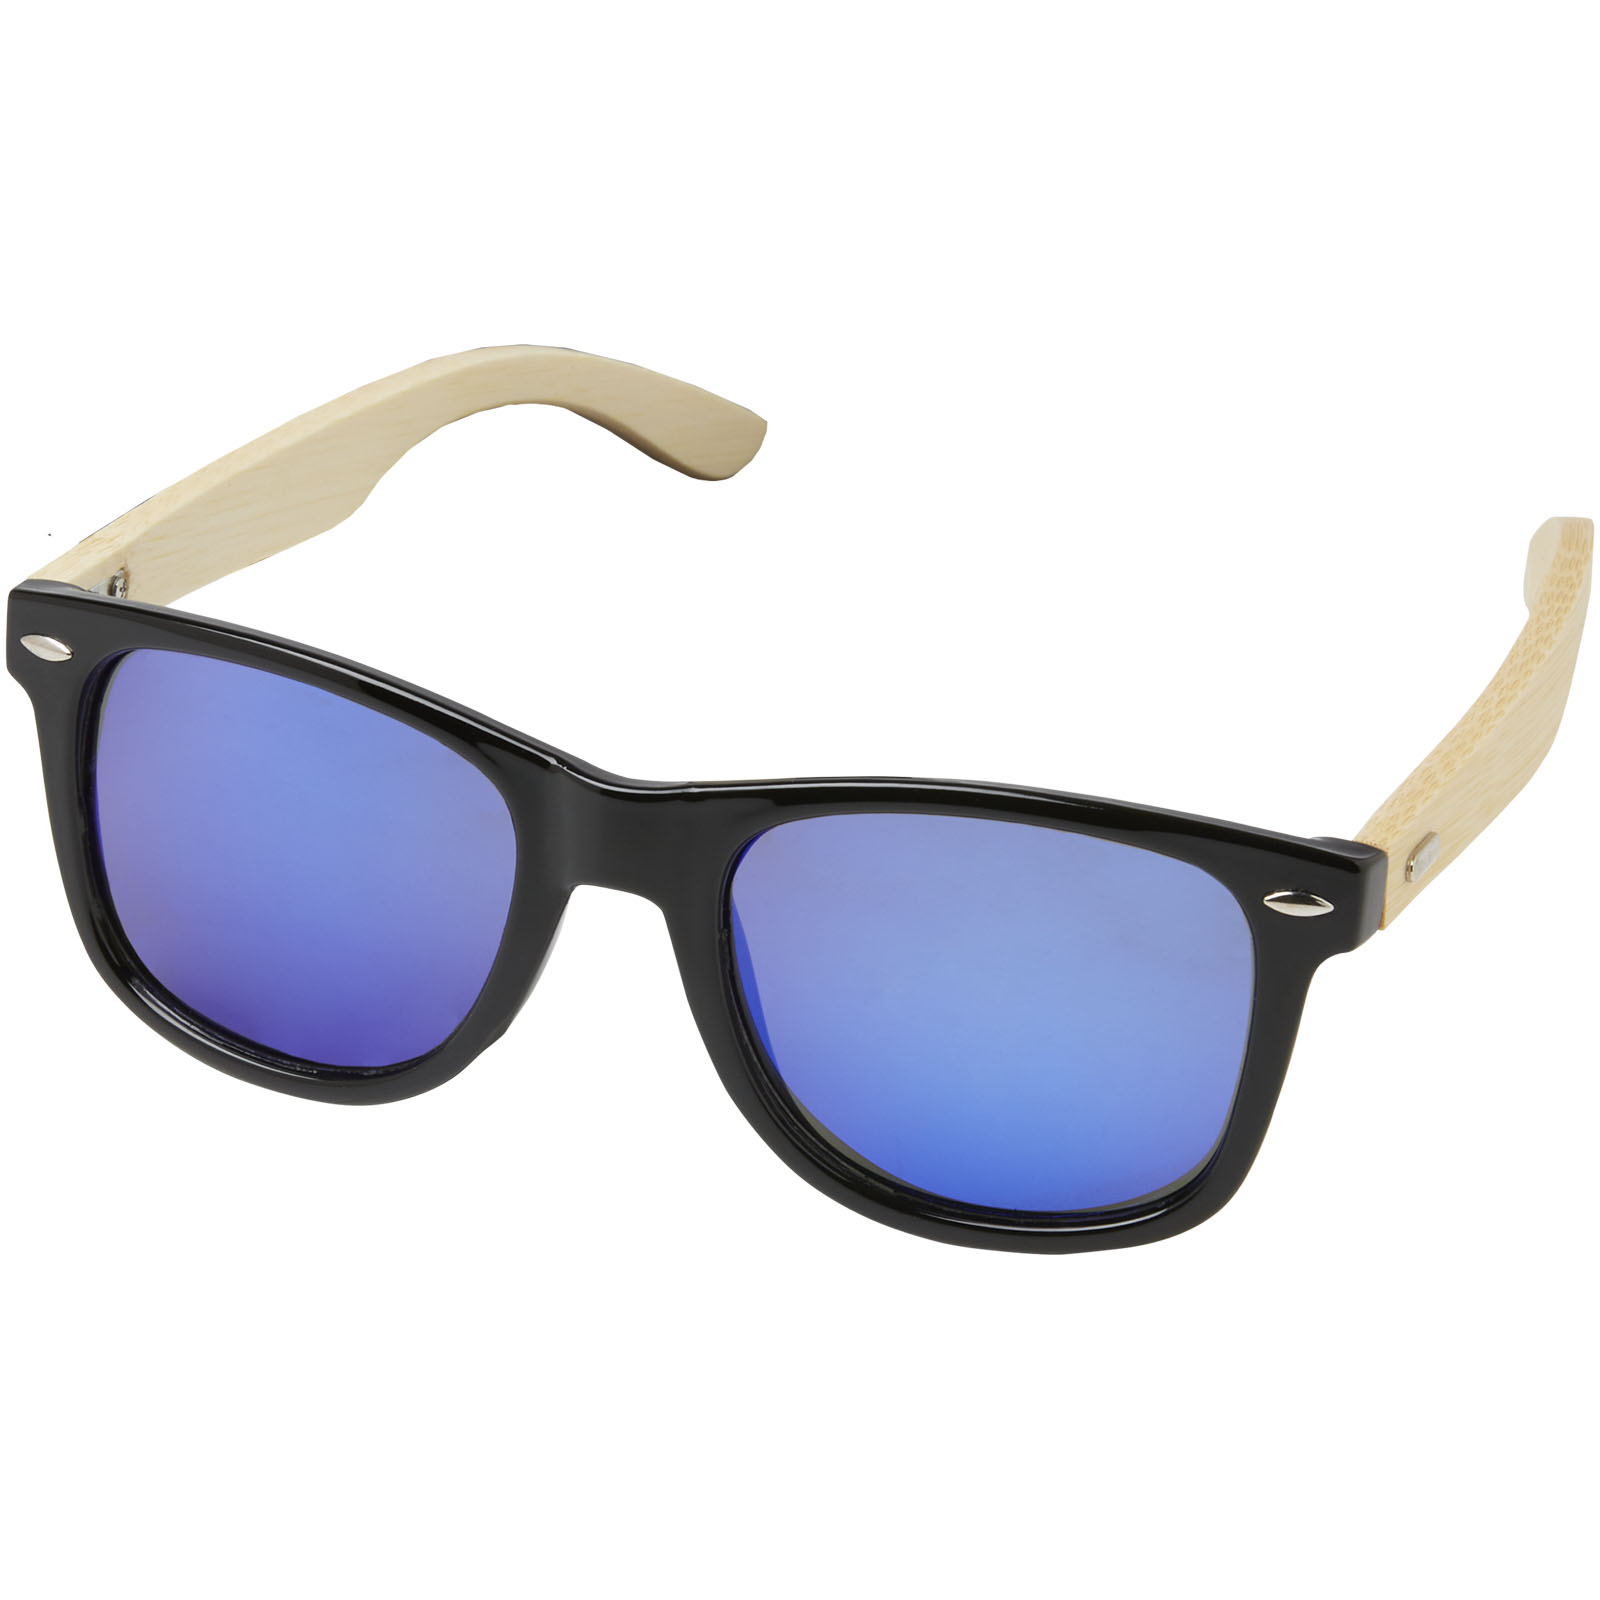 Advertising Sunglasses - Taiyō rPET/bamboo mirrored polarized sunglasses in gift box